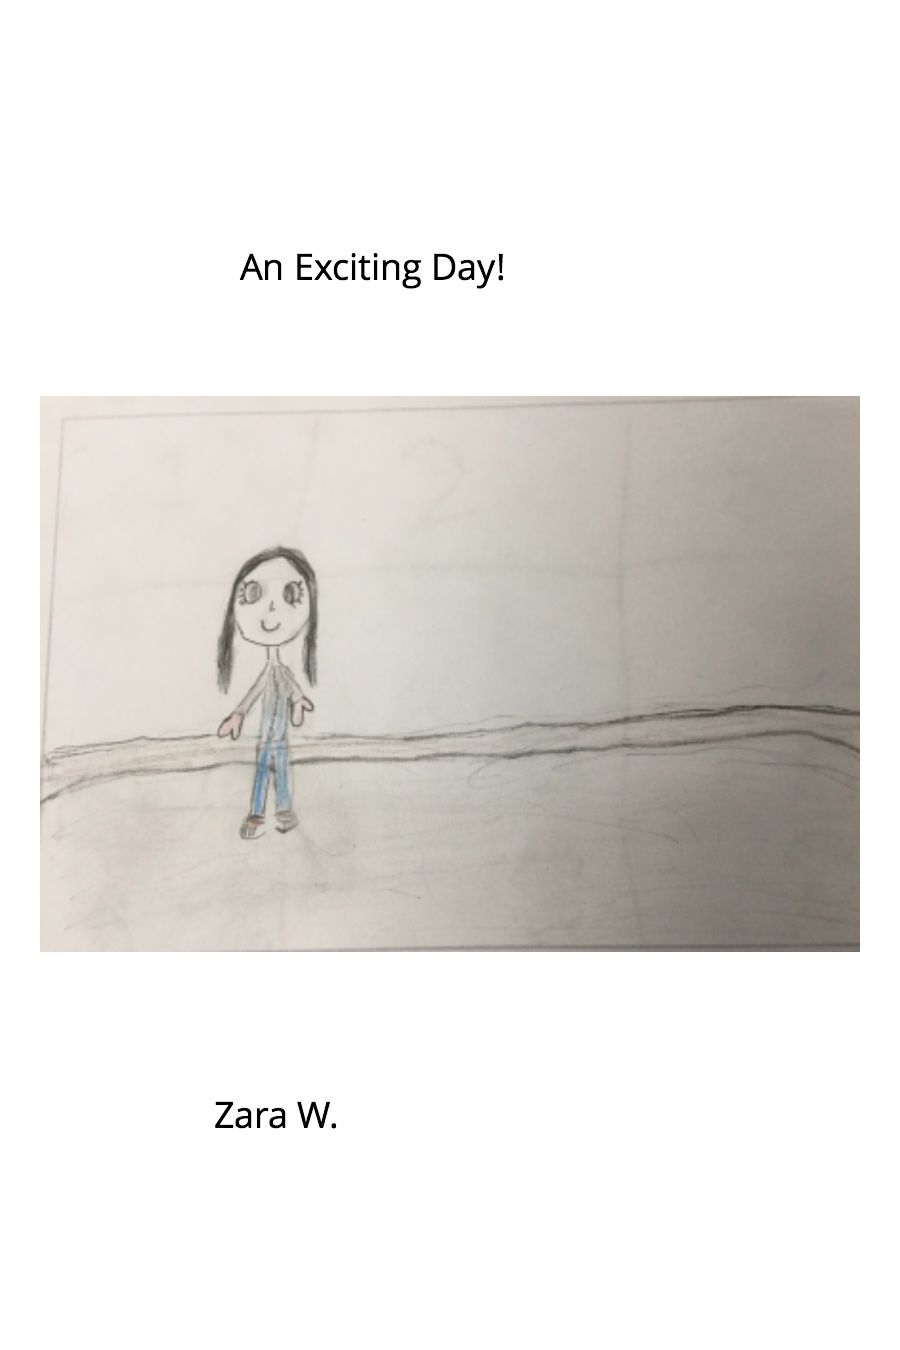 An Exciting Day by Zara W